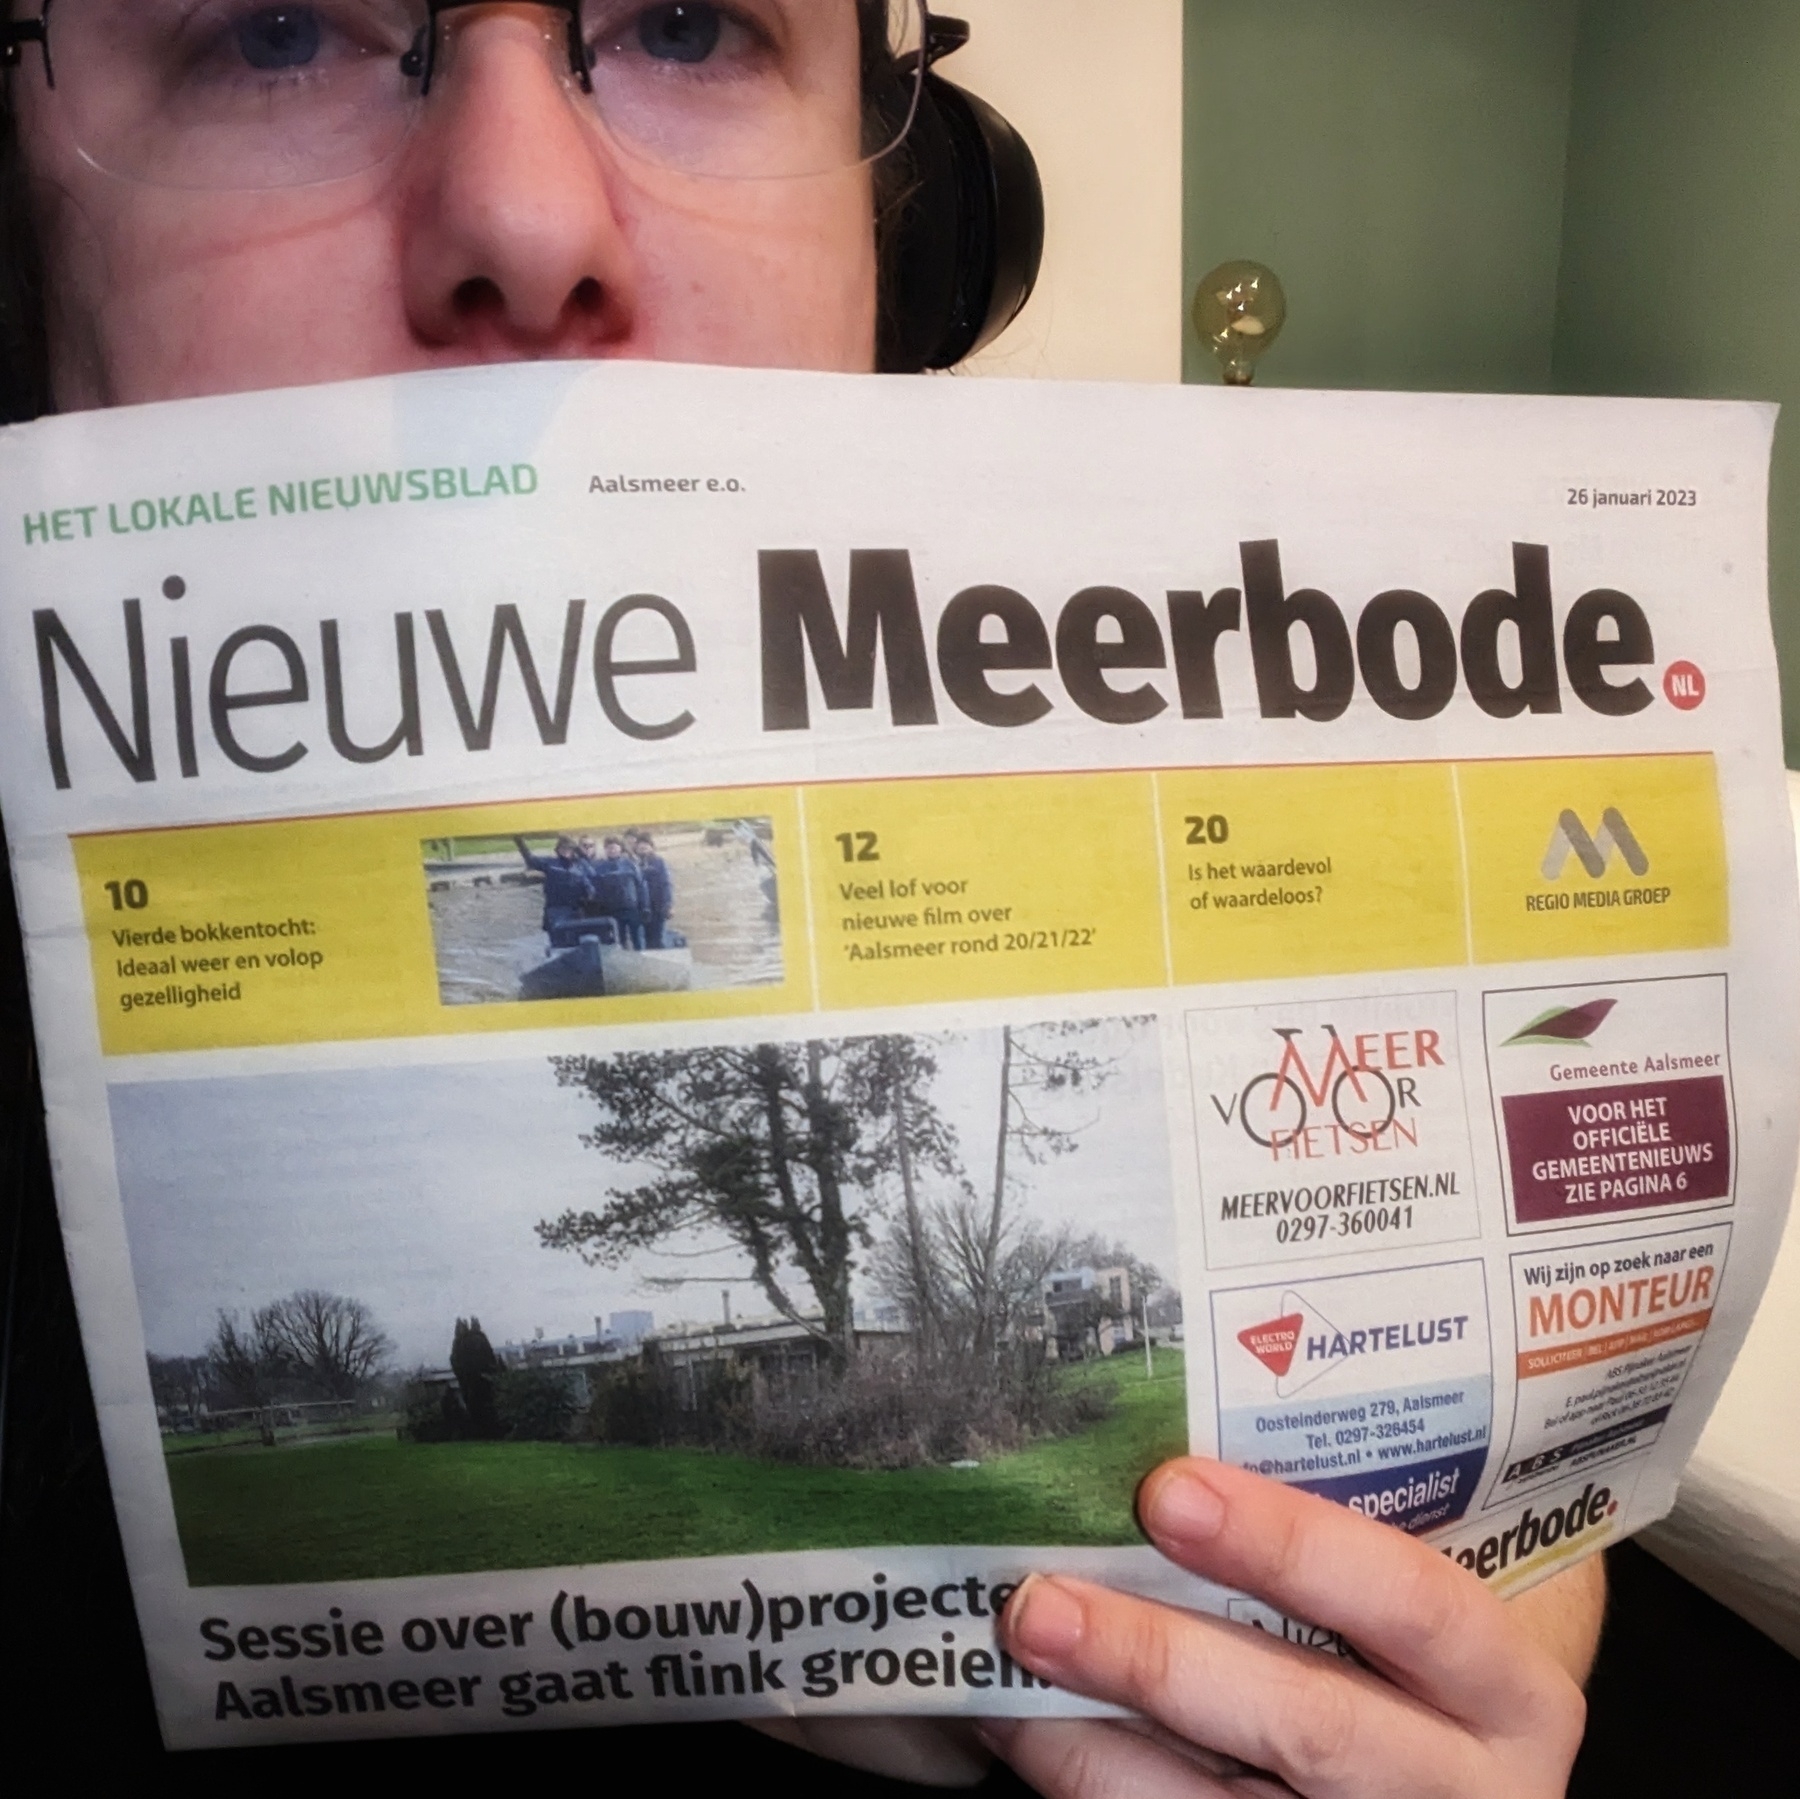 A white woman wearing glasses holds up a Dutch newspaper.